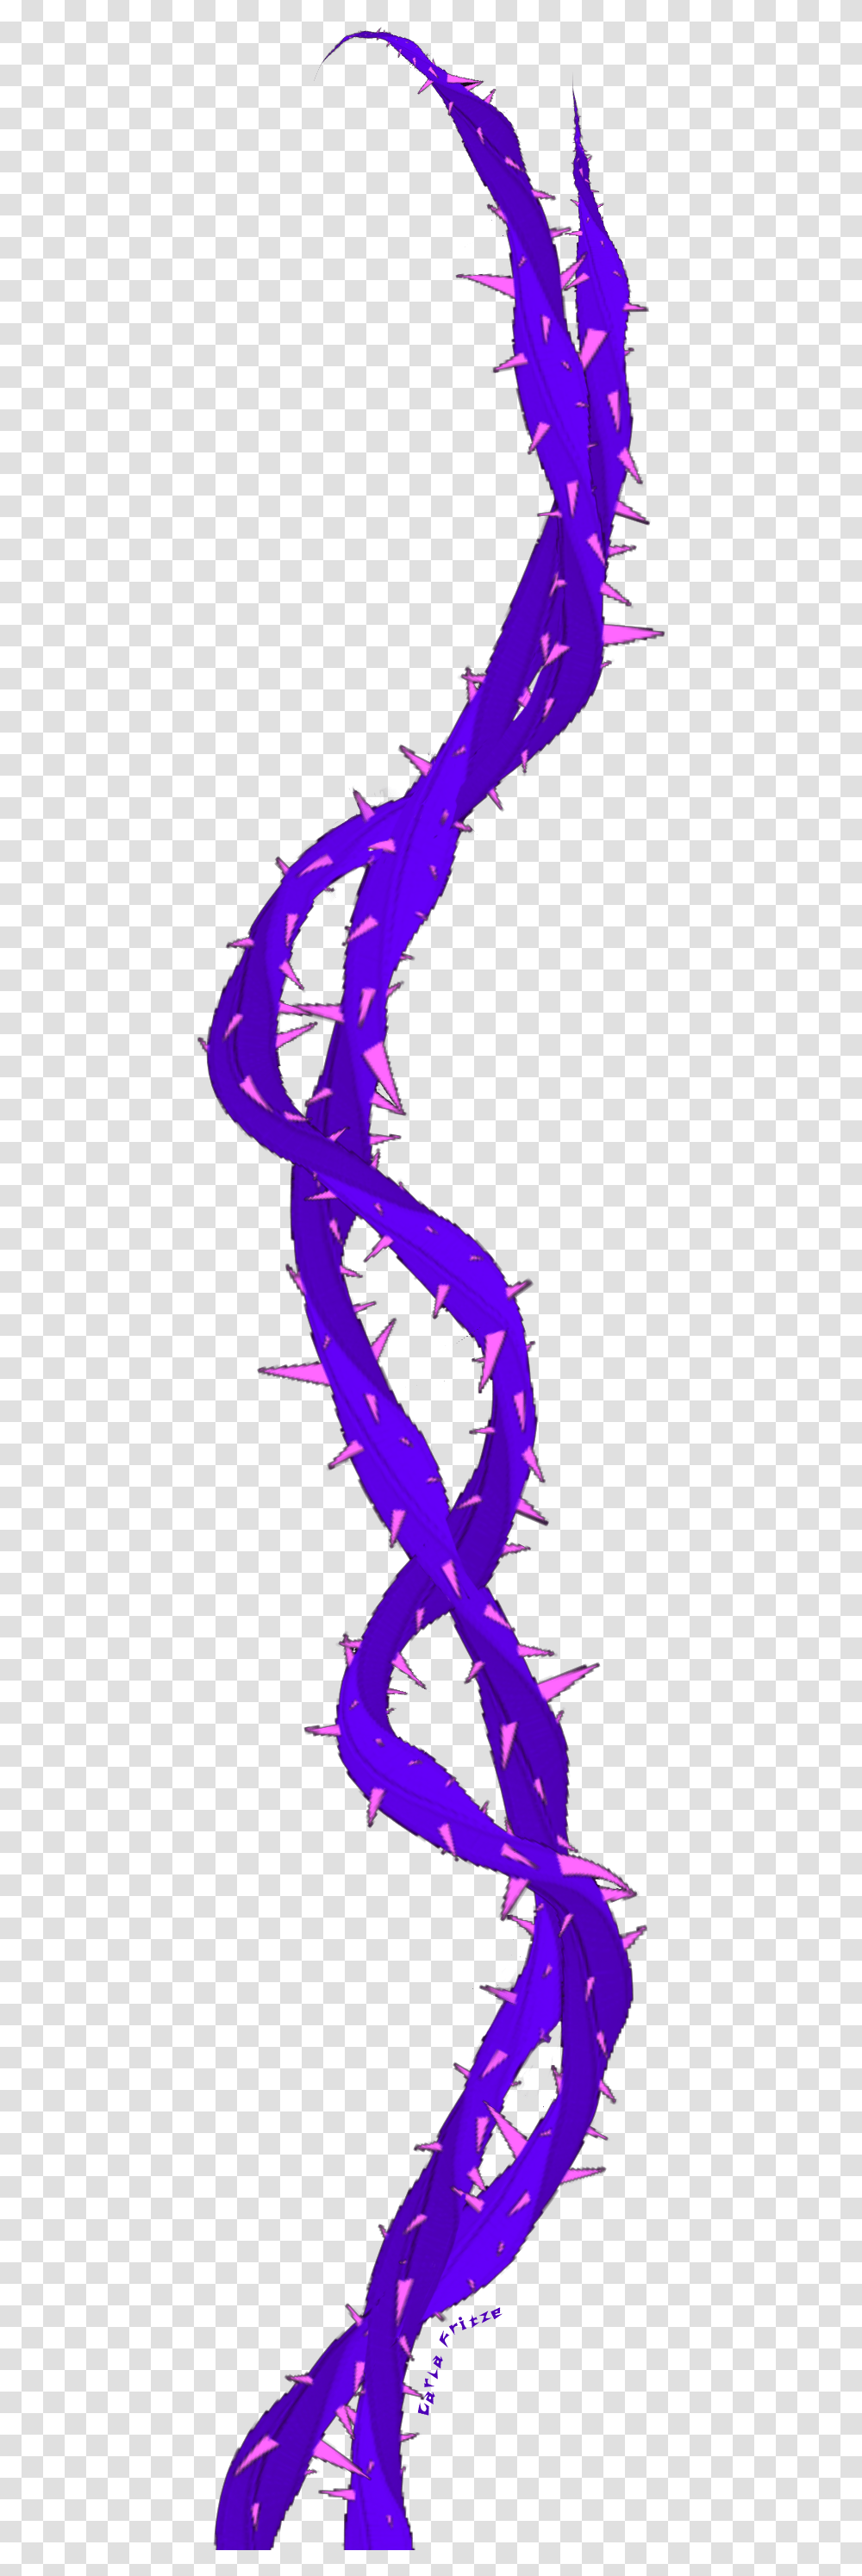 Vine Thorns Plant Floral Carlafritze Freetoedit Purple Vines With Thorns, Animal, Paper Transparent Png